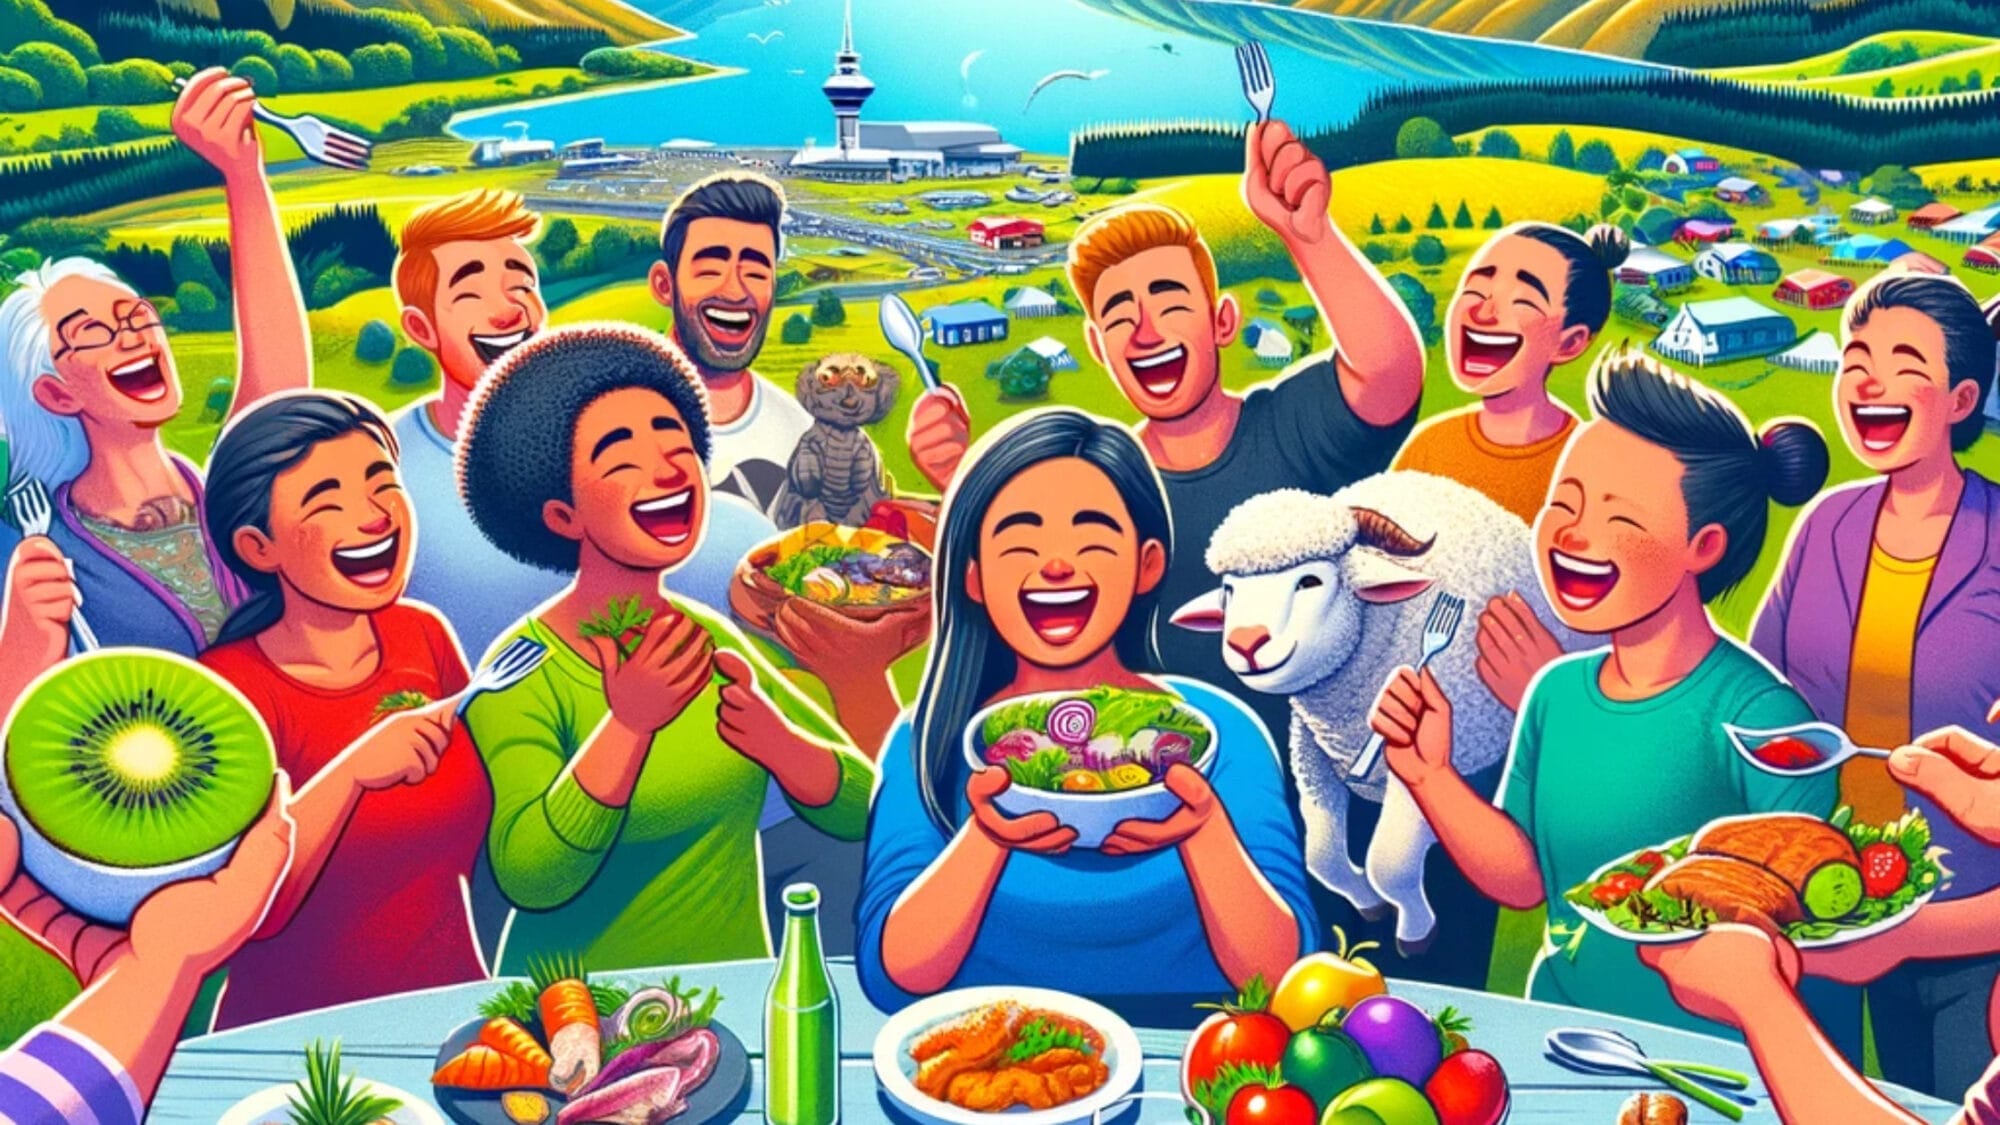 People eating free food in New Zealand